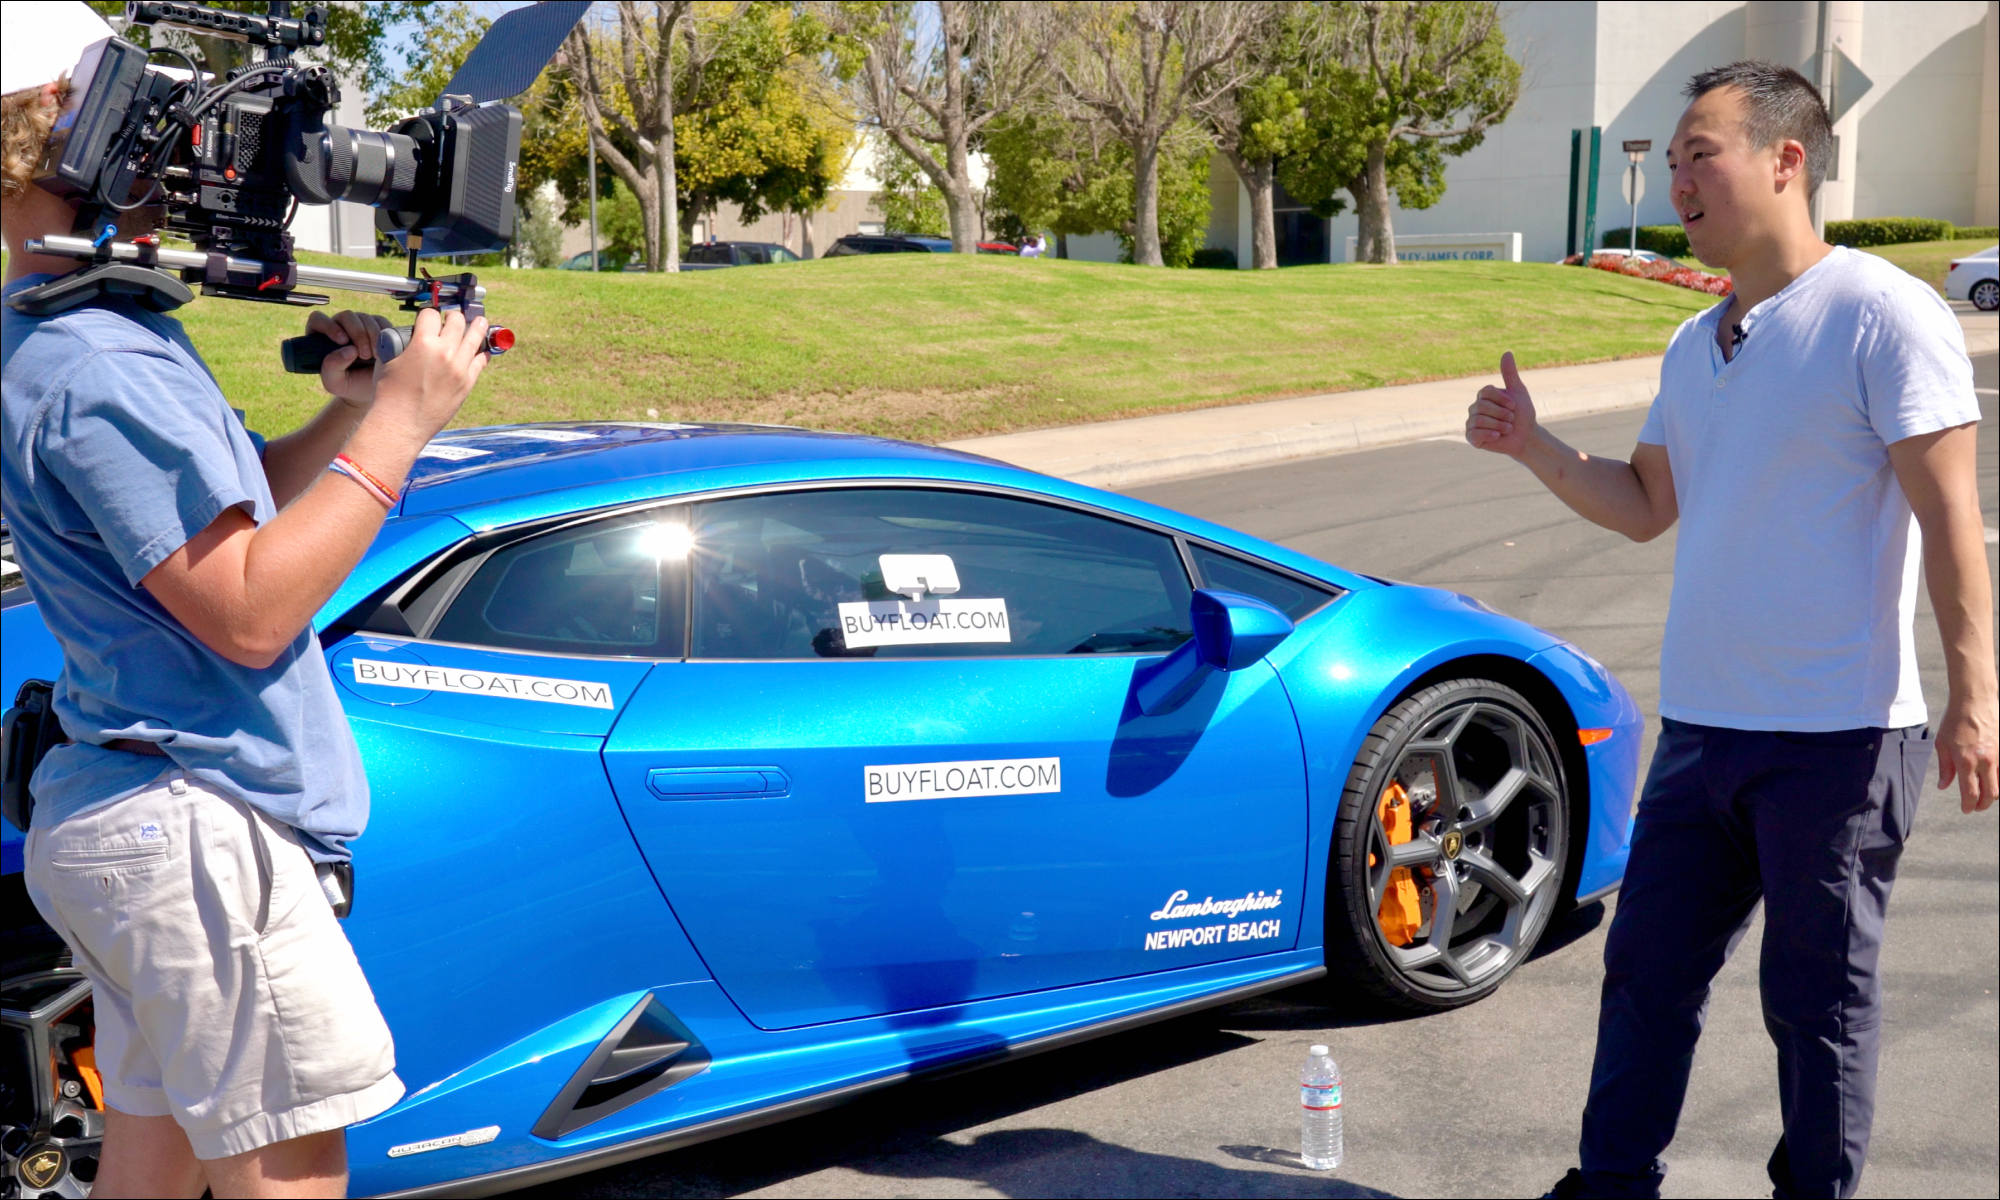 YJ Heo being interviewed prior to product testing FLOAT on a bright blue Lamborghini supercar.